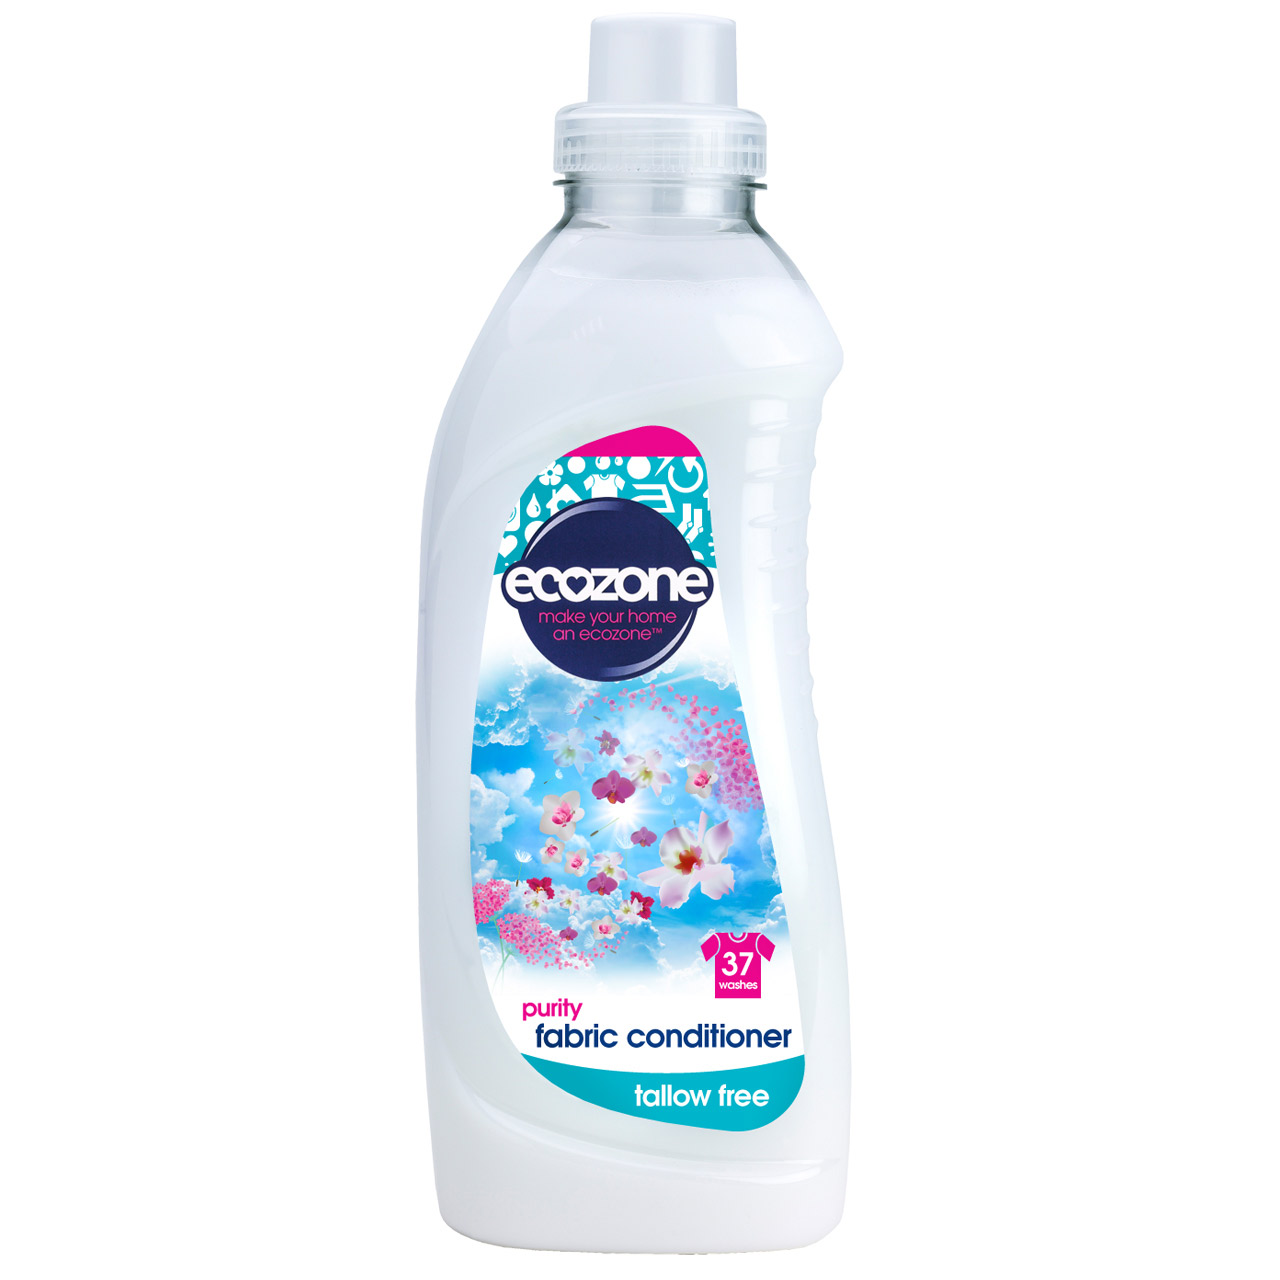 Image of Ecozone Pure & Tallow Free Fabric Conditioner - Purity - 1L